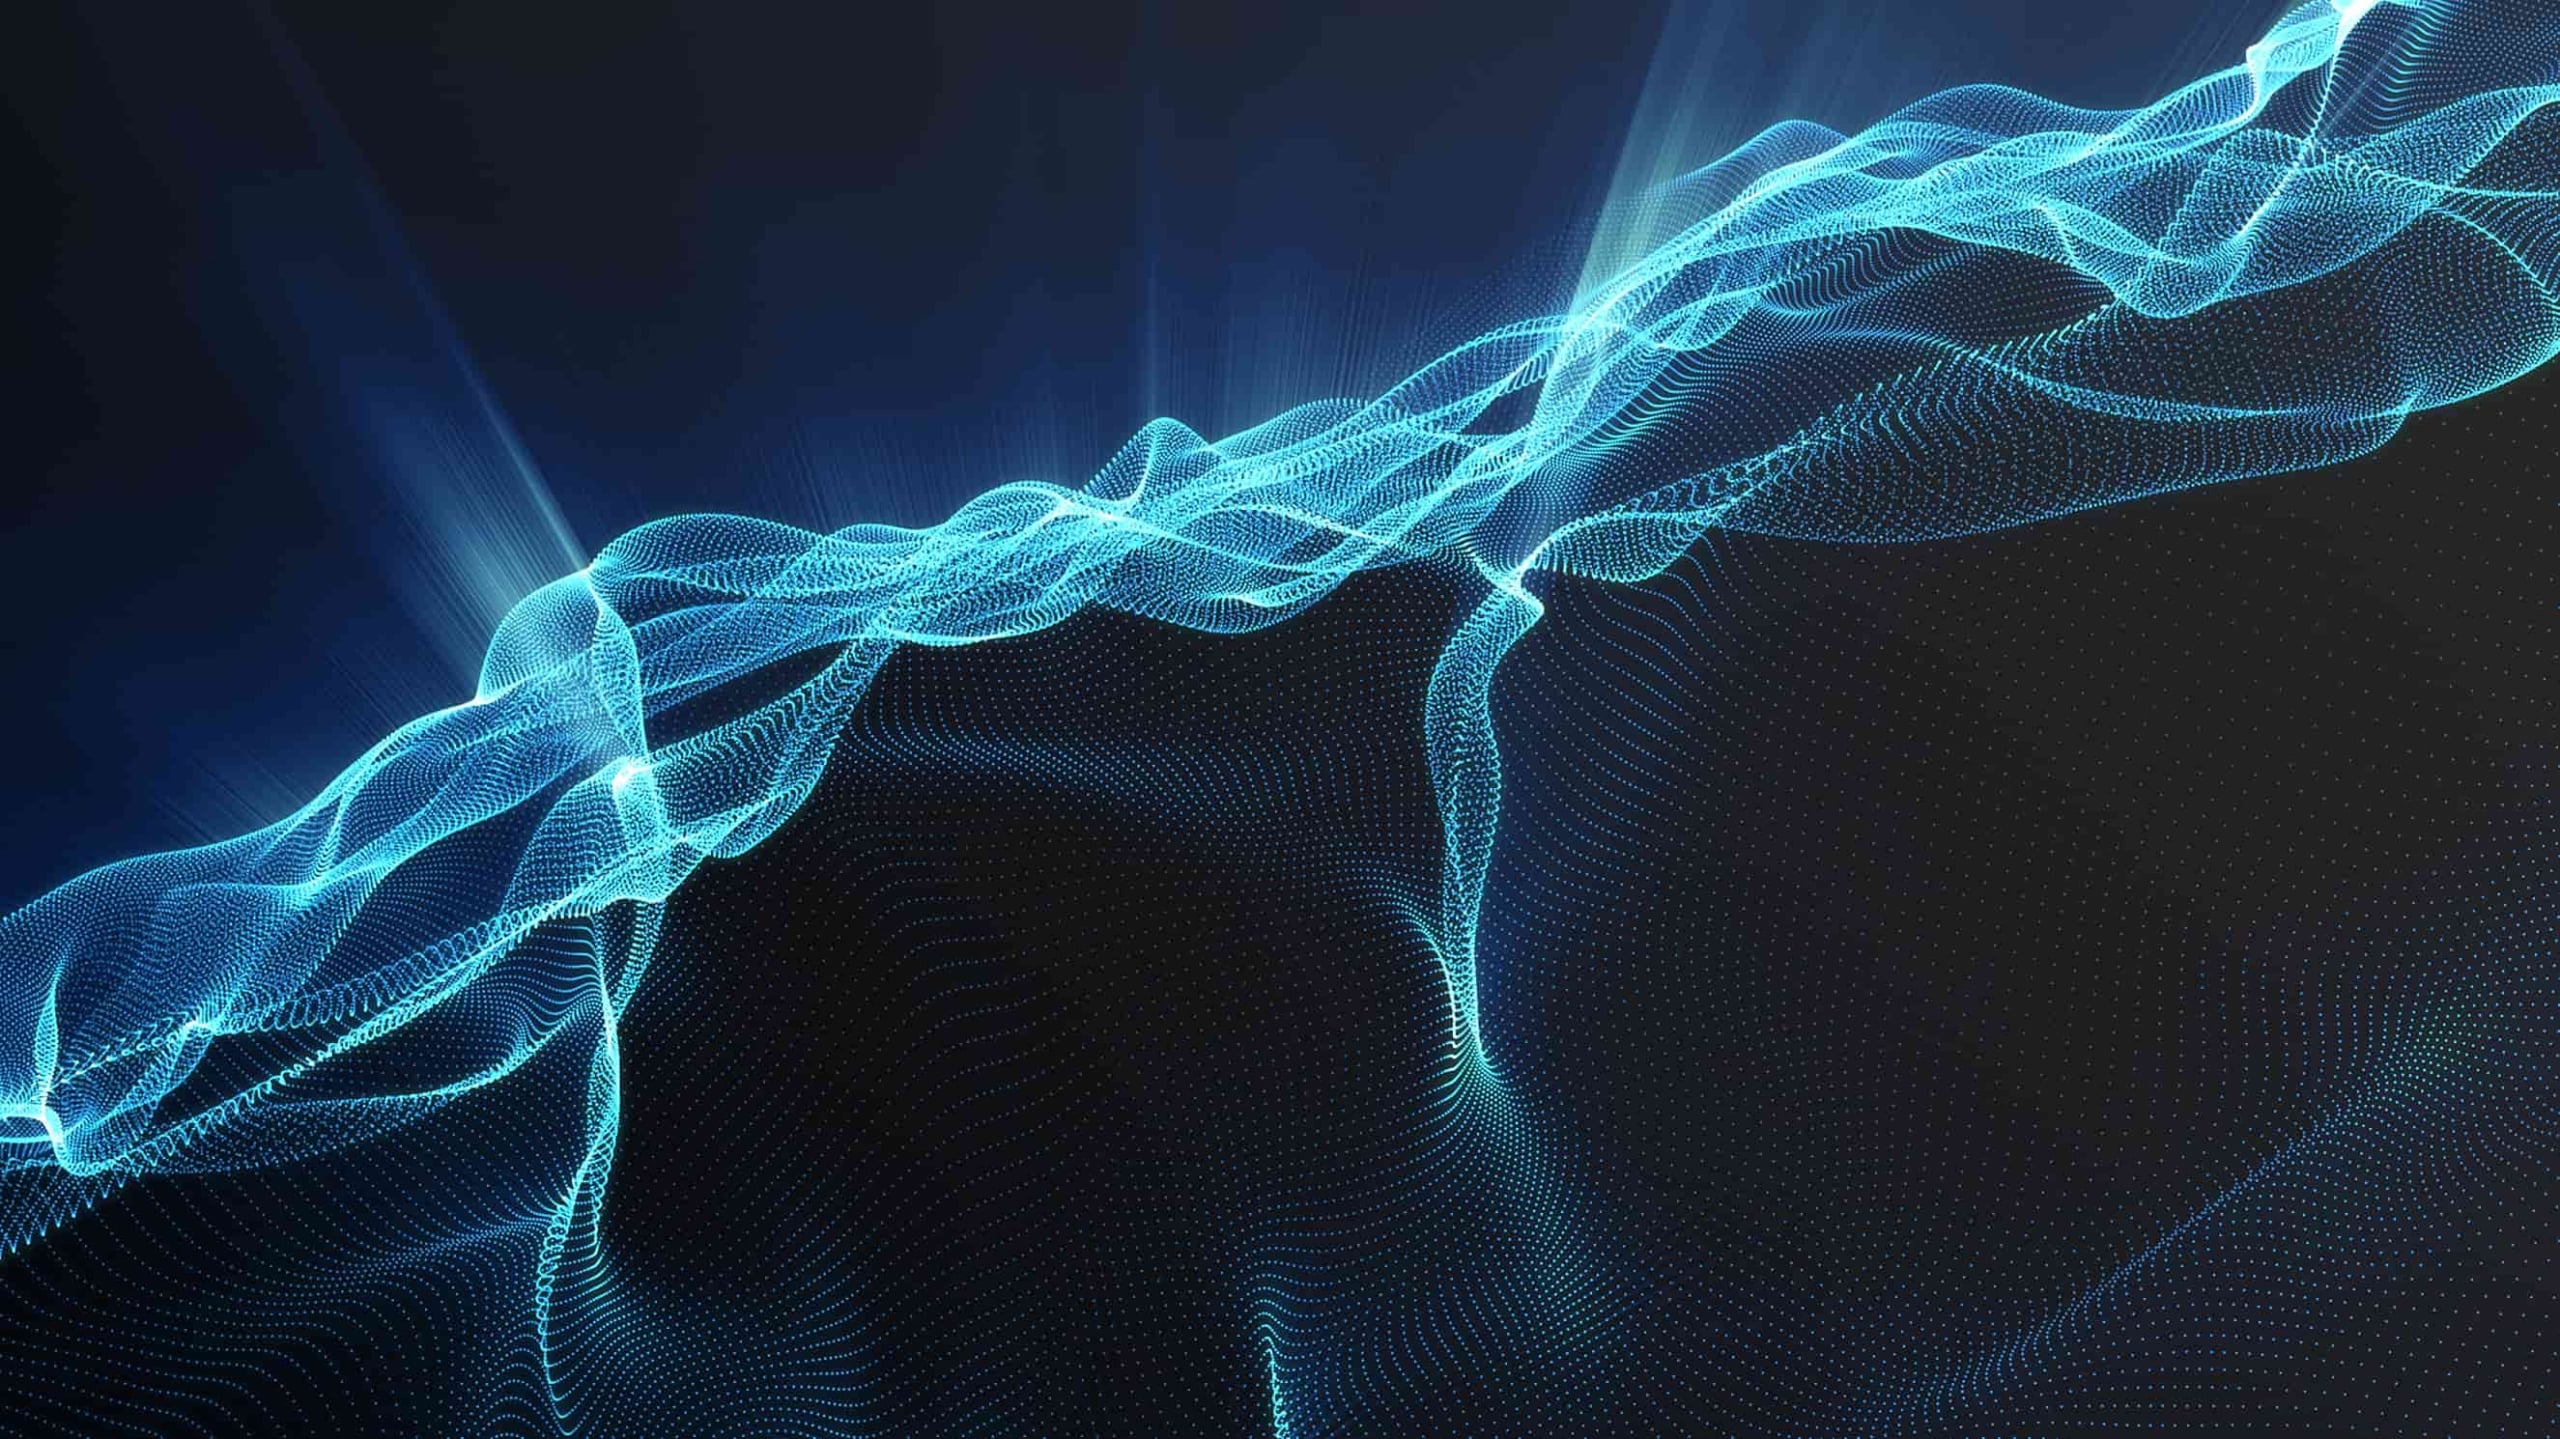 Abstract digital image featuring a glowing blue wave made of particles moving over a dark grid background, representing motion and data flow in cyberspace.